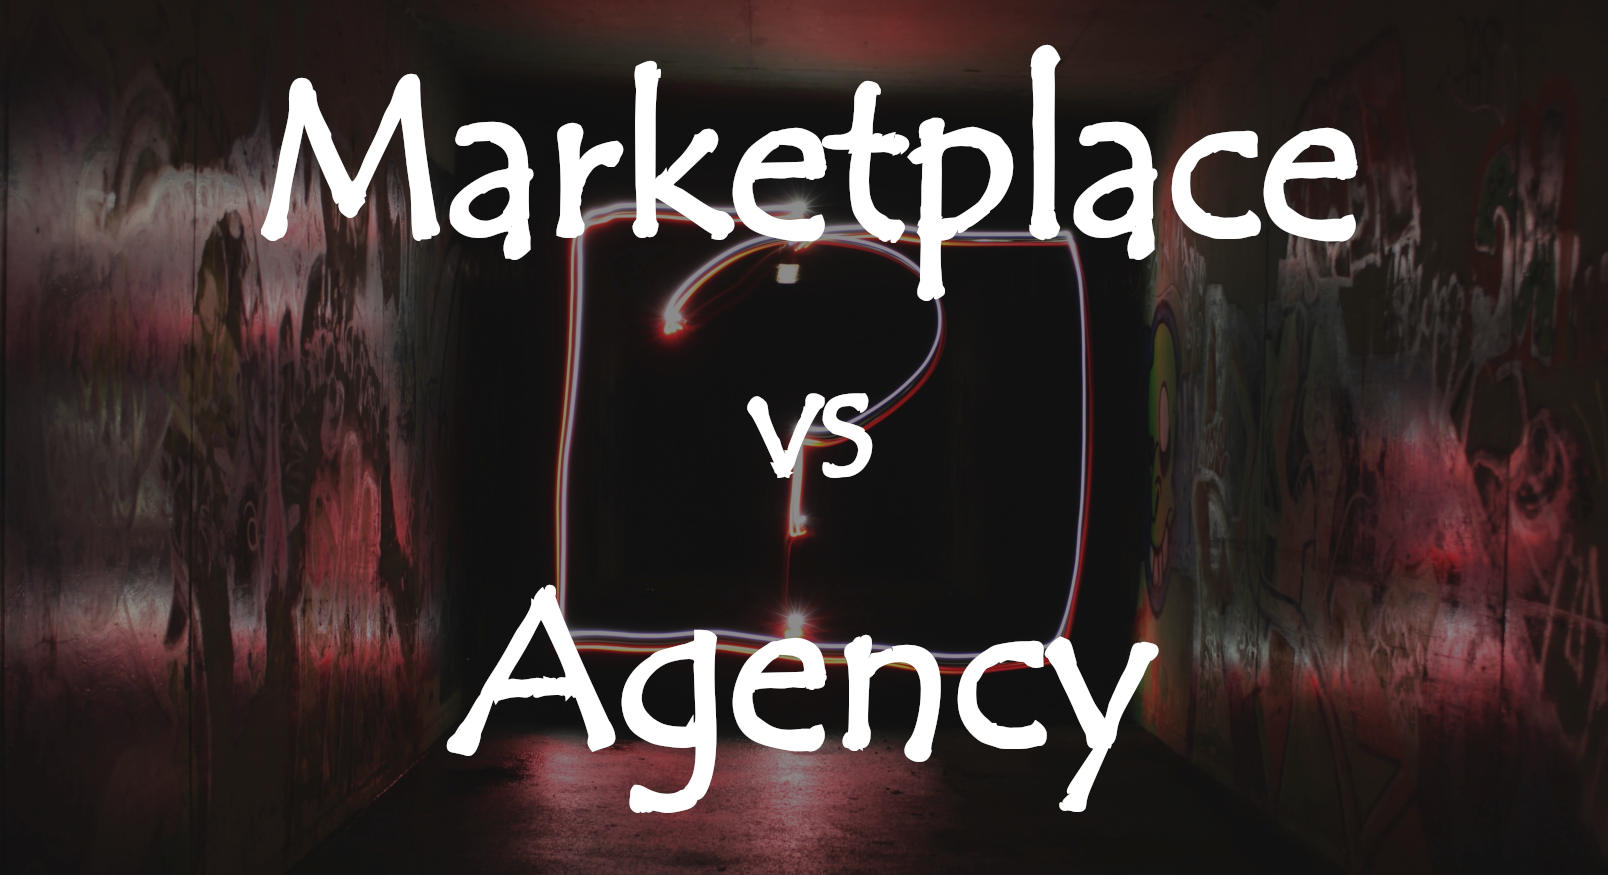 Marketplace or agency?